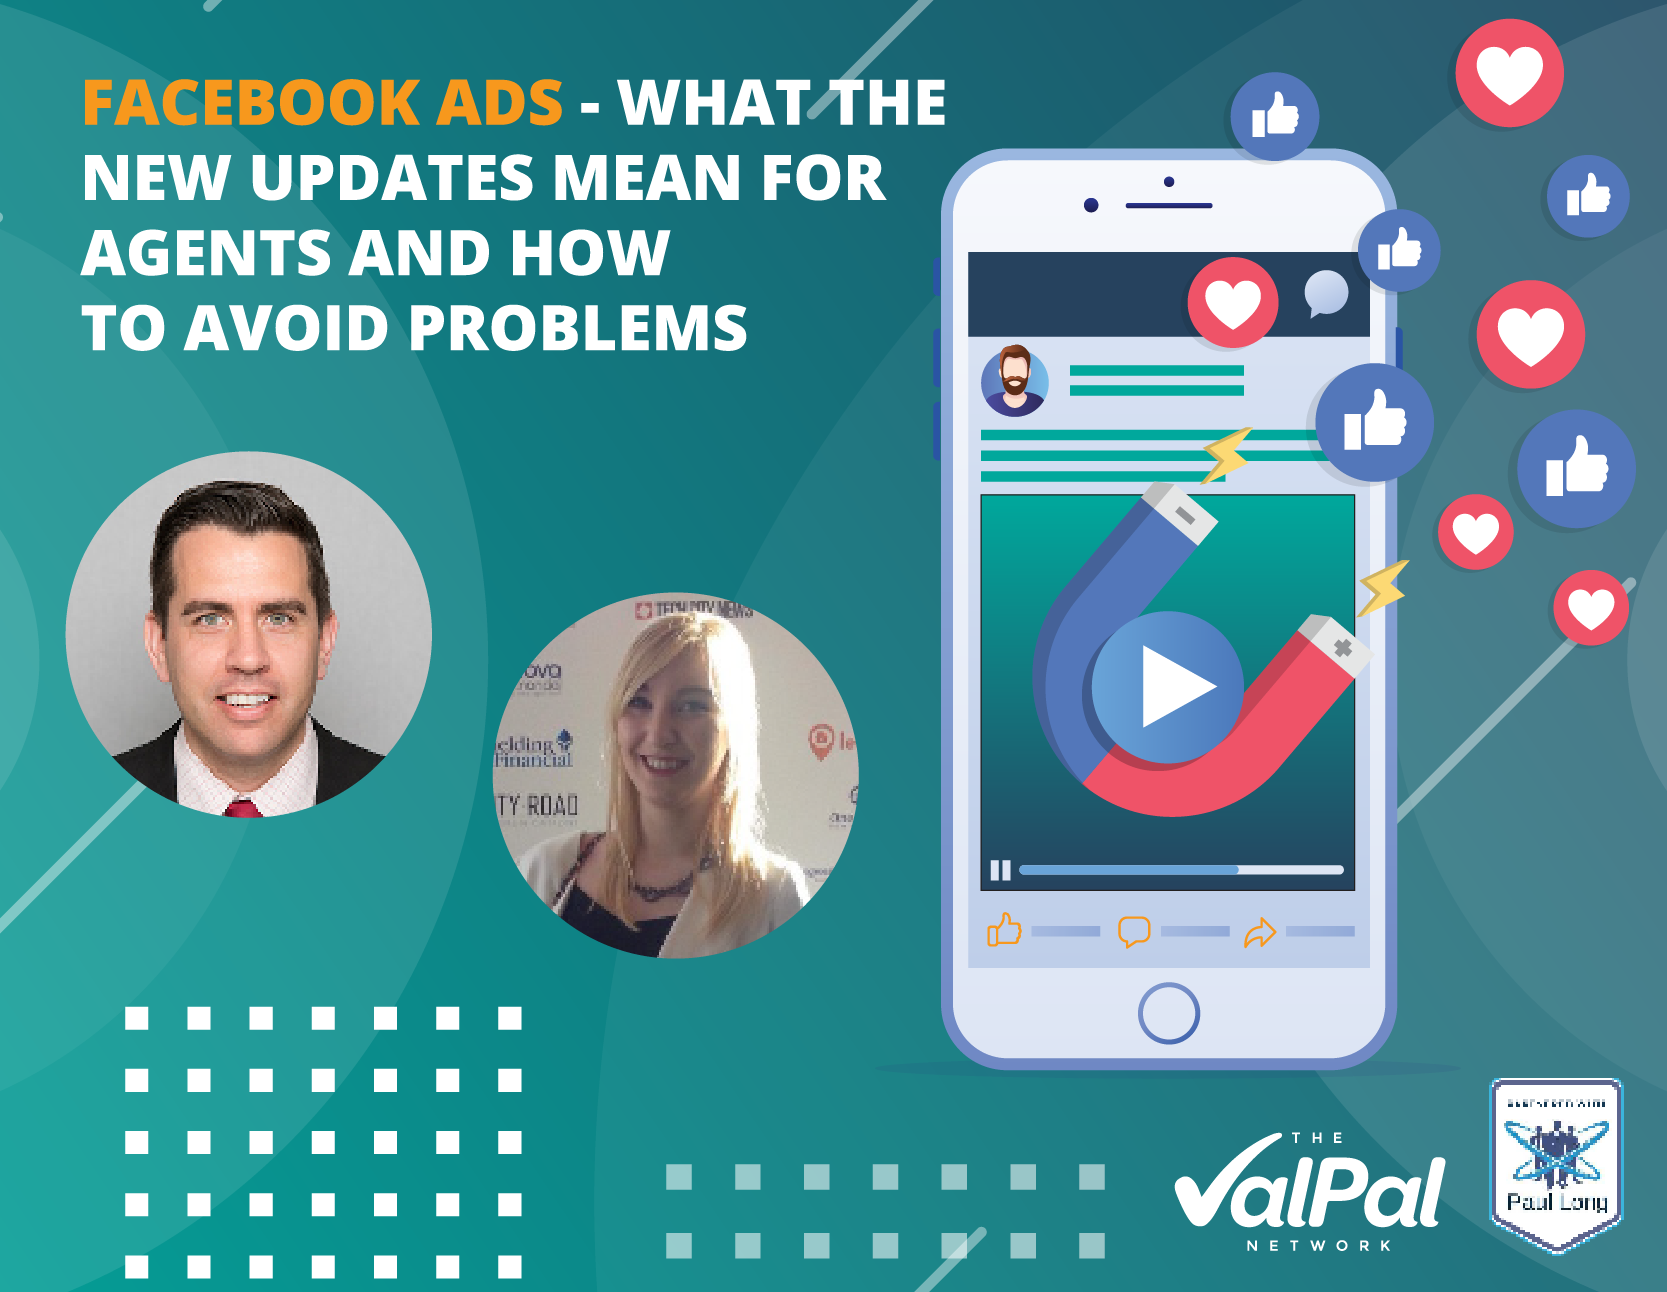 Facebook ads – what the new updates mean for agents and how to avoid problems